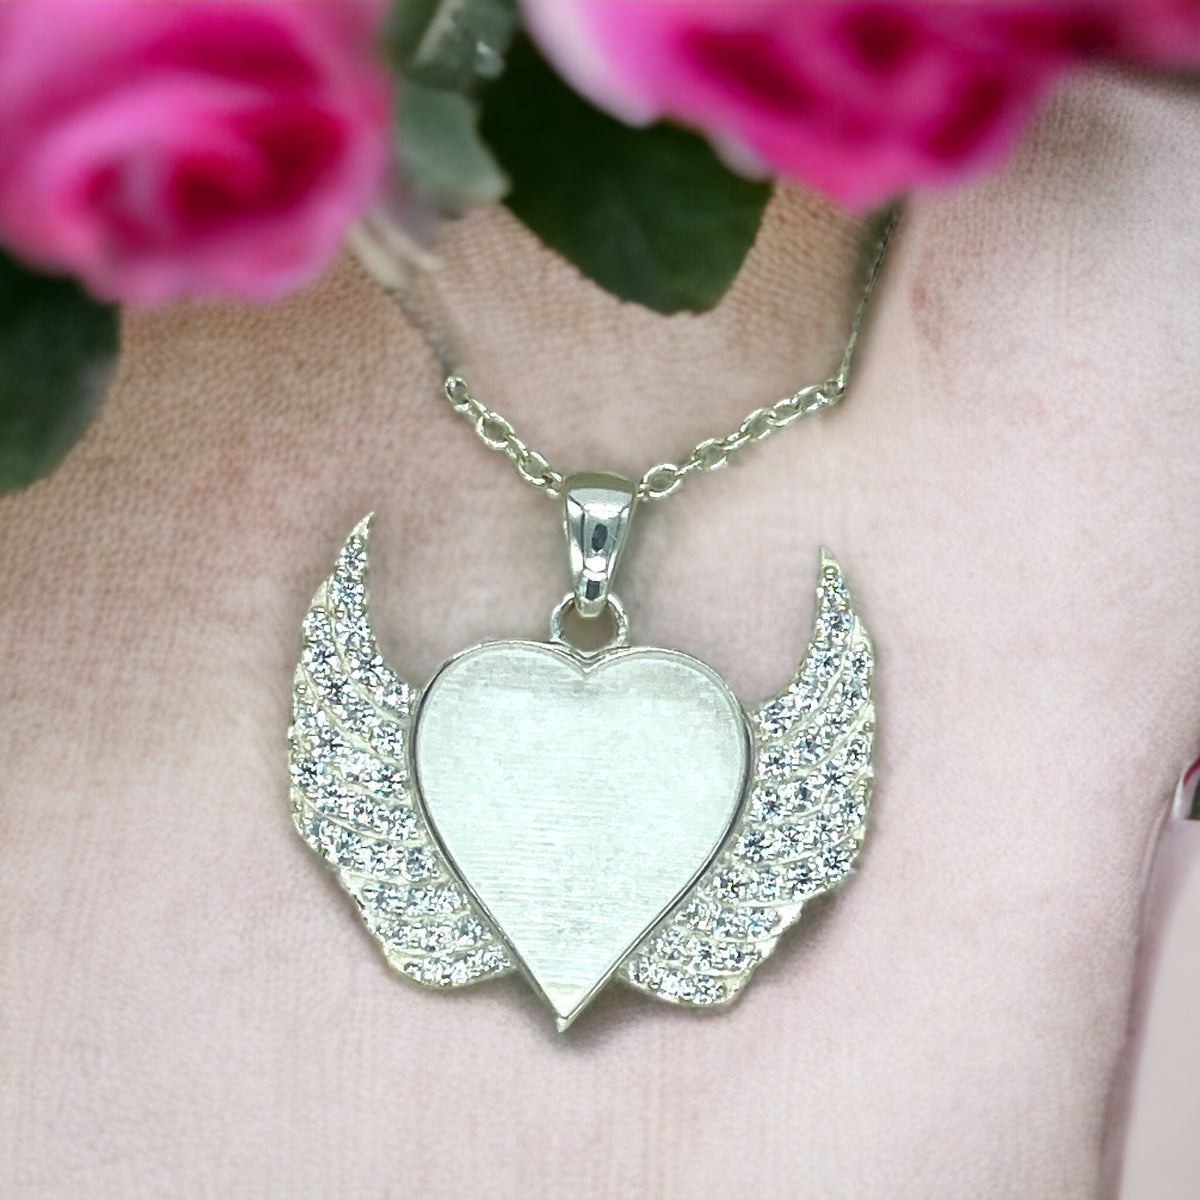 Heart With Wings 925 Sterling Silver Bezel Blank With Chain Keepsake For UV and Epoxy Resin with FREE Gift Box